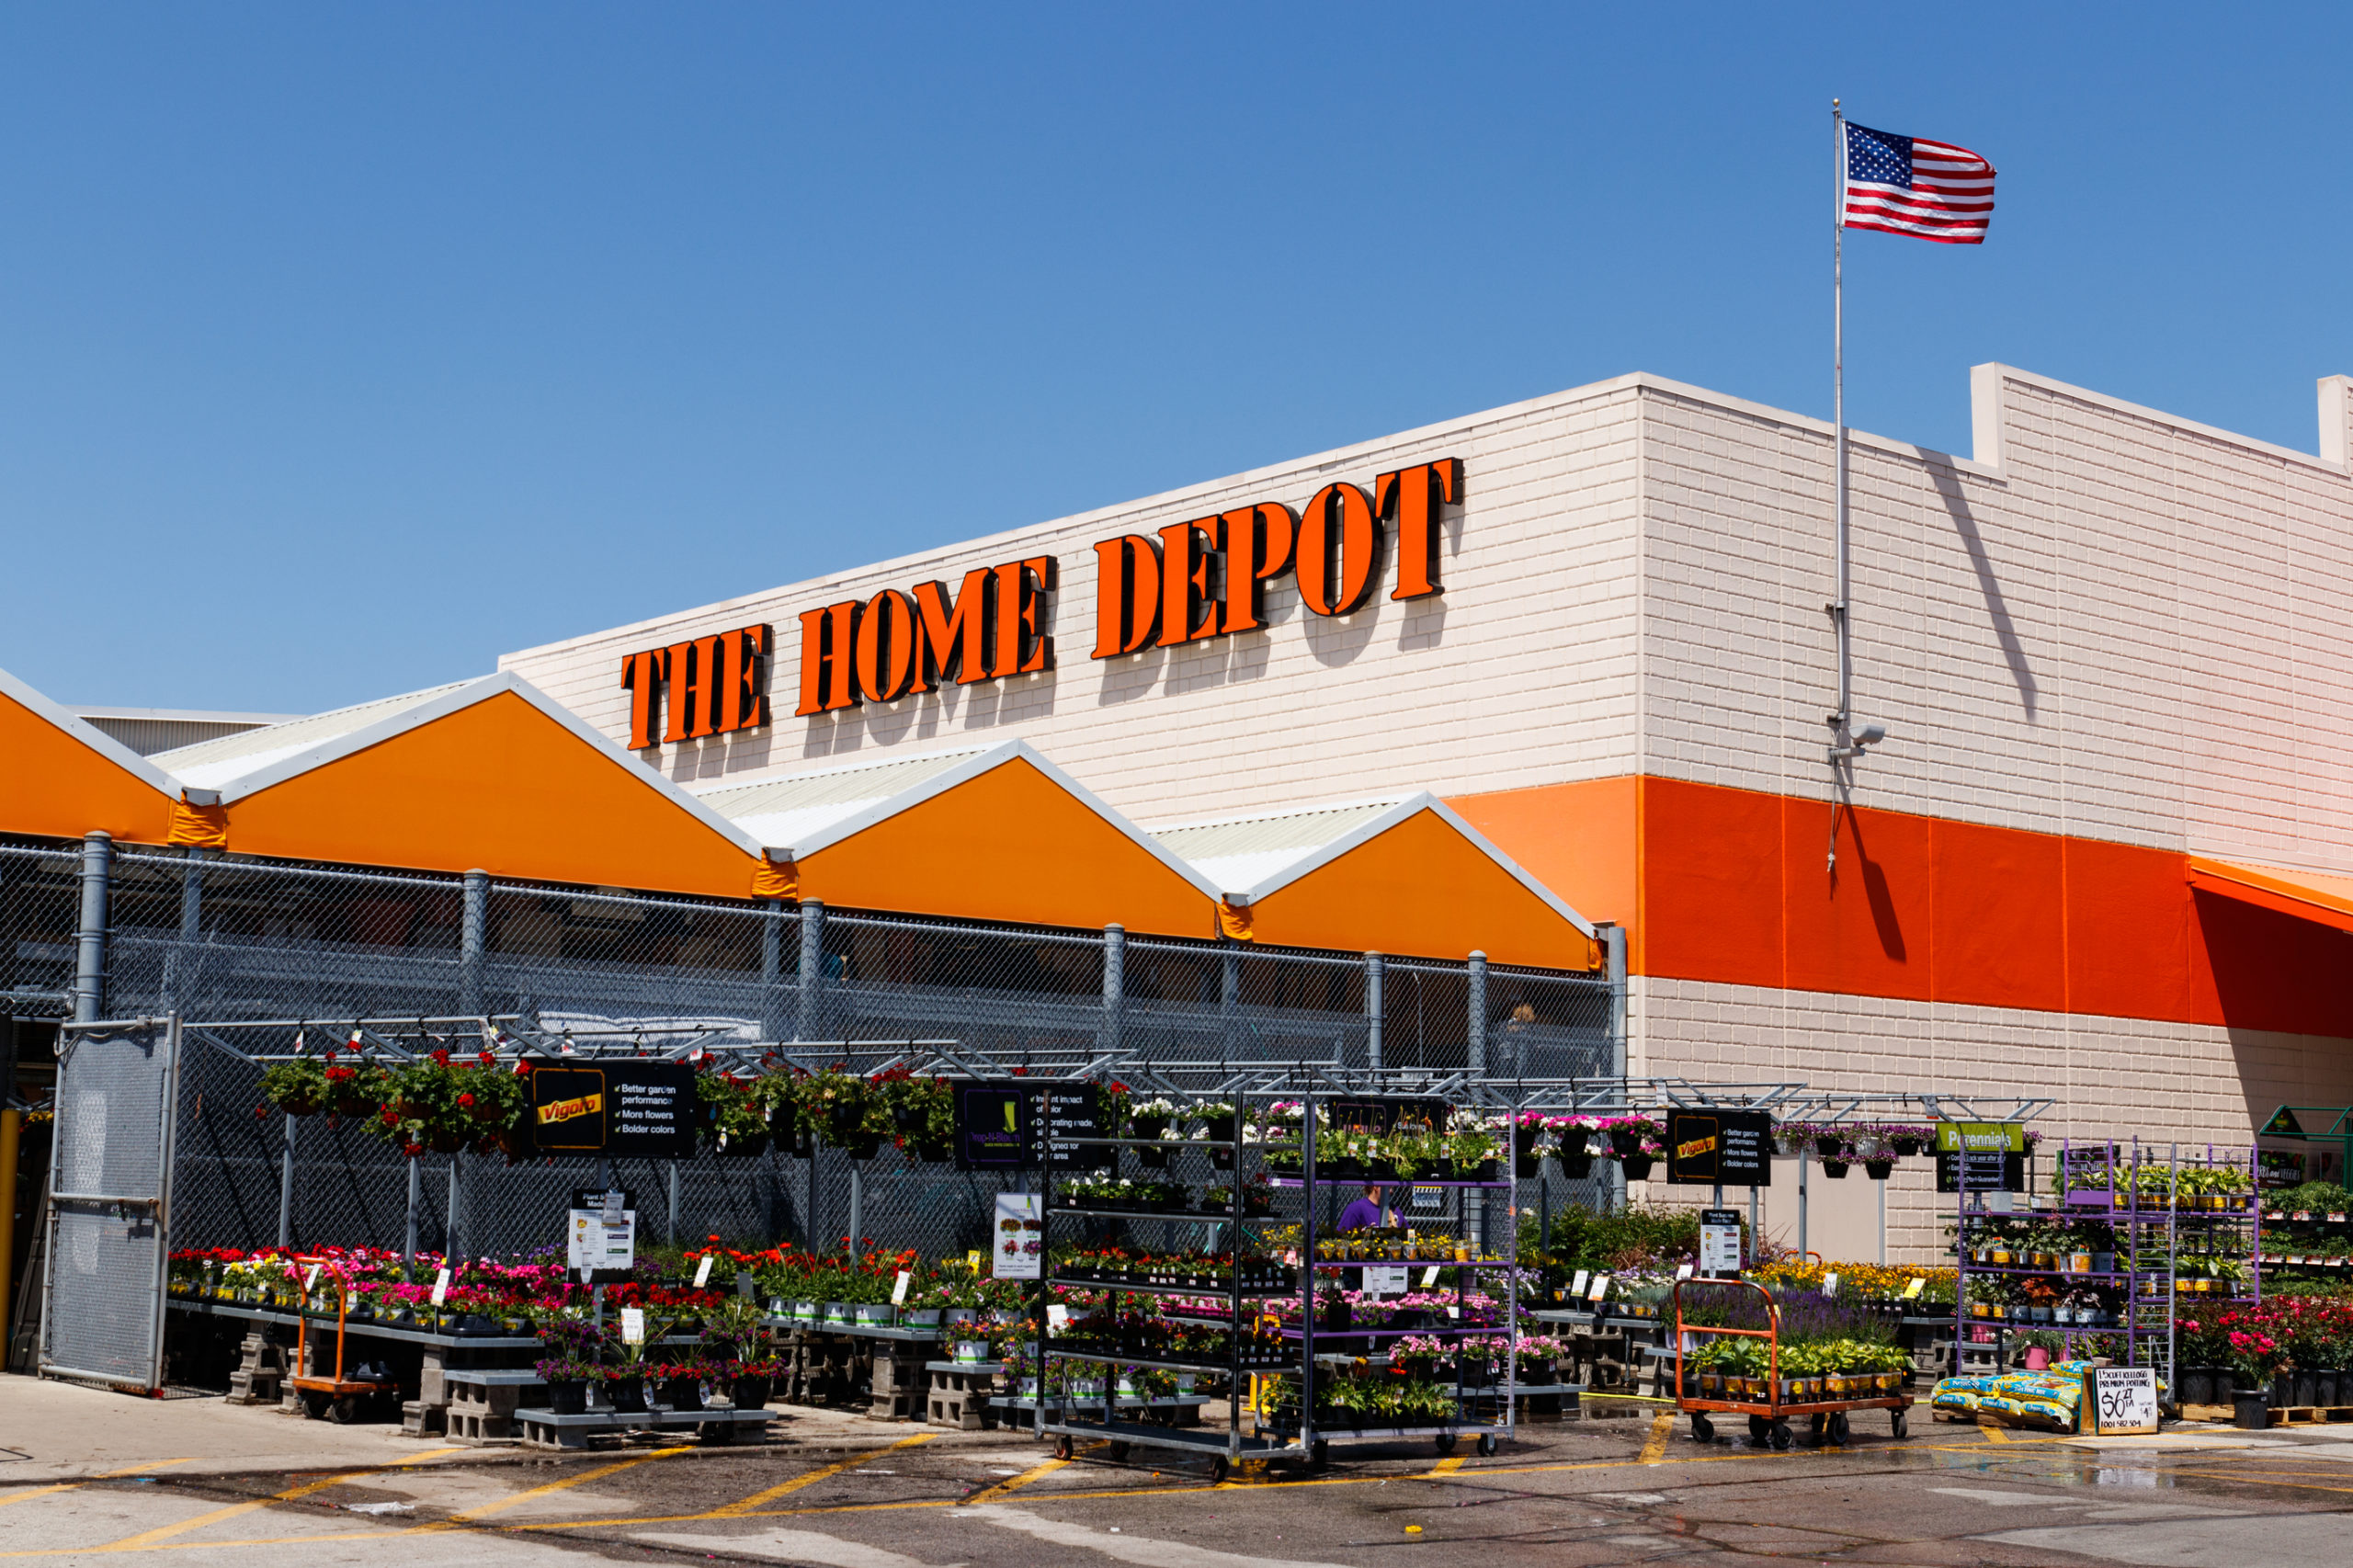 The best deals of The Home Depot's 4th of July sale Clark Deals